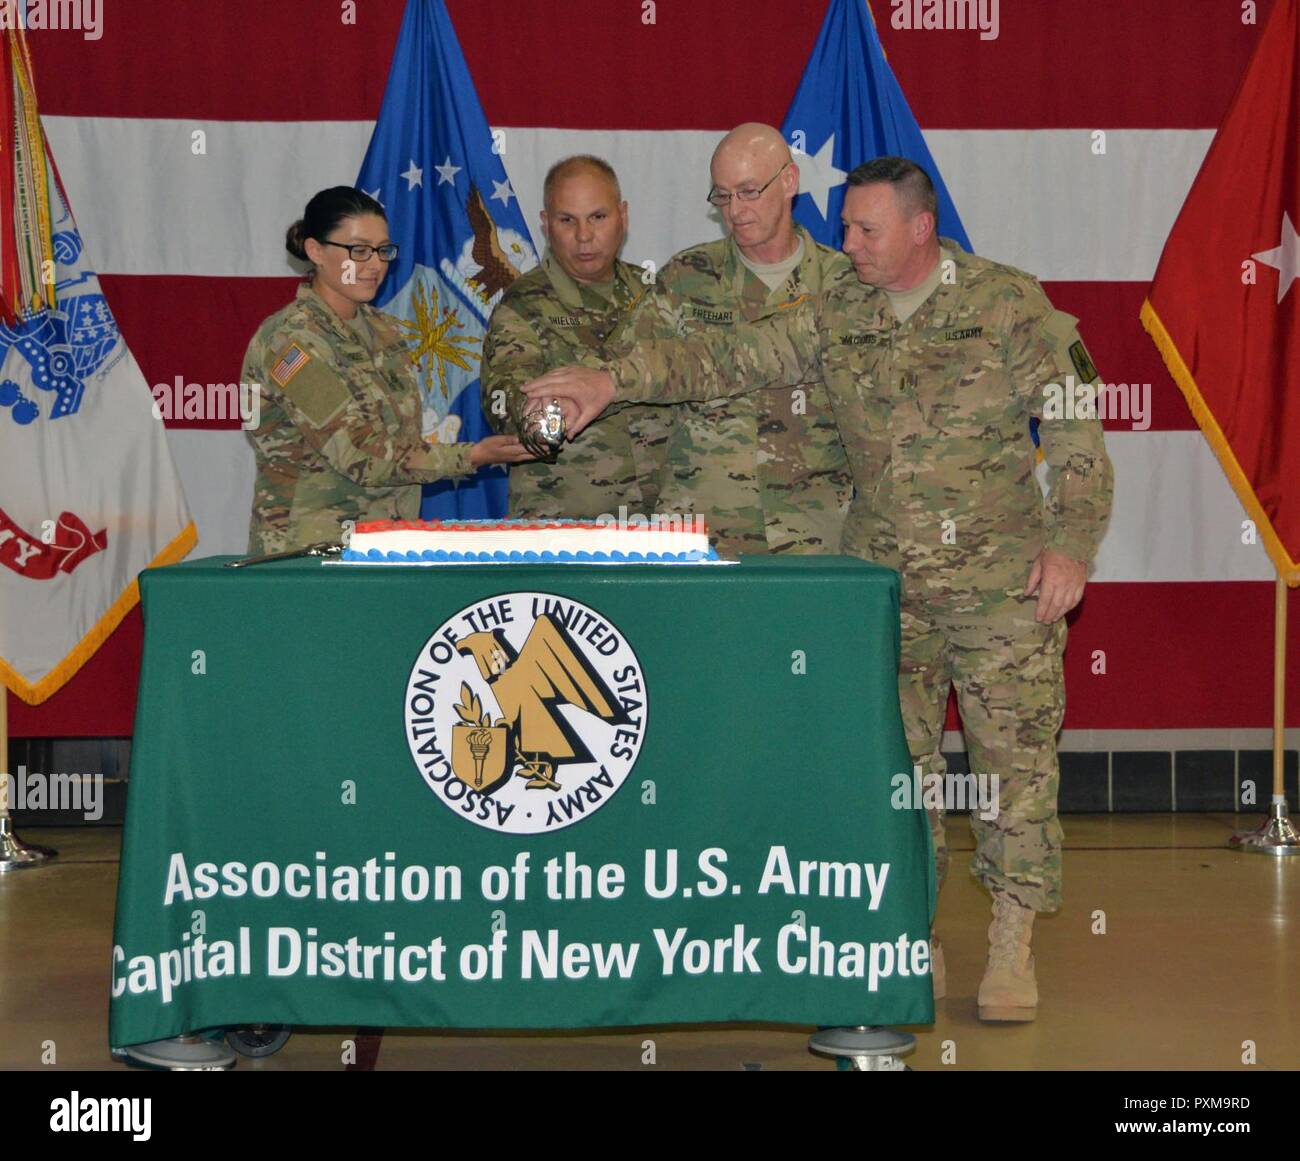 Youngest and oldest Soldiers present cut the birthday cake during Army Birthday ceremonies at New York National Guard Headquarters in Latham, N.Y. on June 17, 2017. Cutting the cake are, from left, PFC Jade Richards, the youngest Solldier, Brig. Gen. Raymond Shields, commander of the New York Army National Guard, Col. James Freehart, the oldest Soldier present, and Chief Warrant Officer 5 Gordon Jacobs, another Army veteran.New York Army National Guard members celebrated the 242nd Birthday of the United States Army. Stock Photo